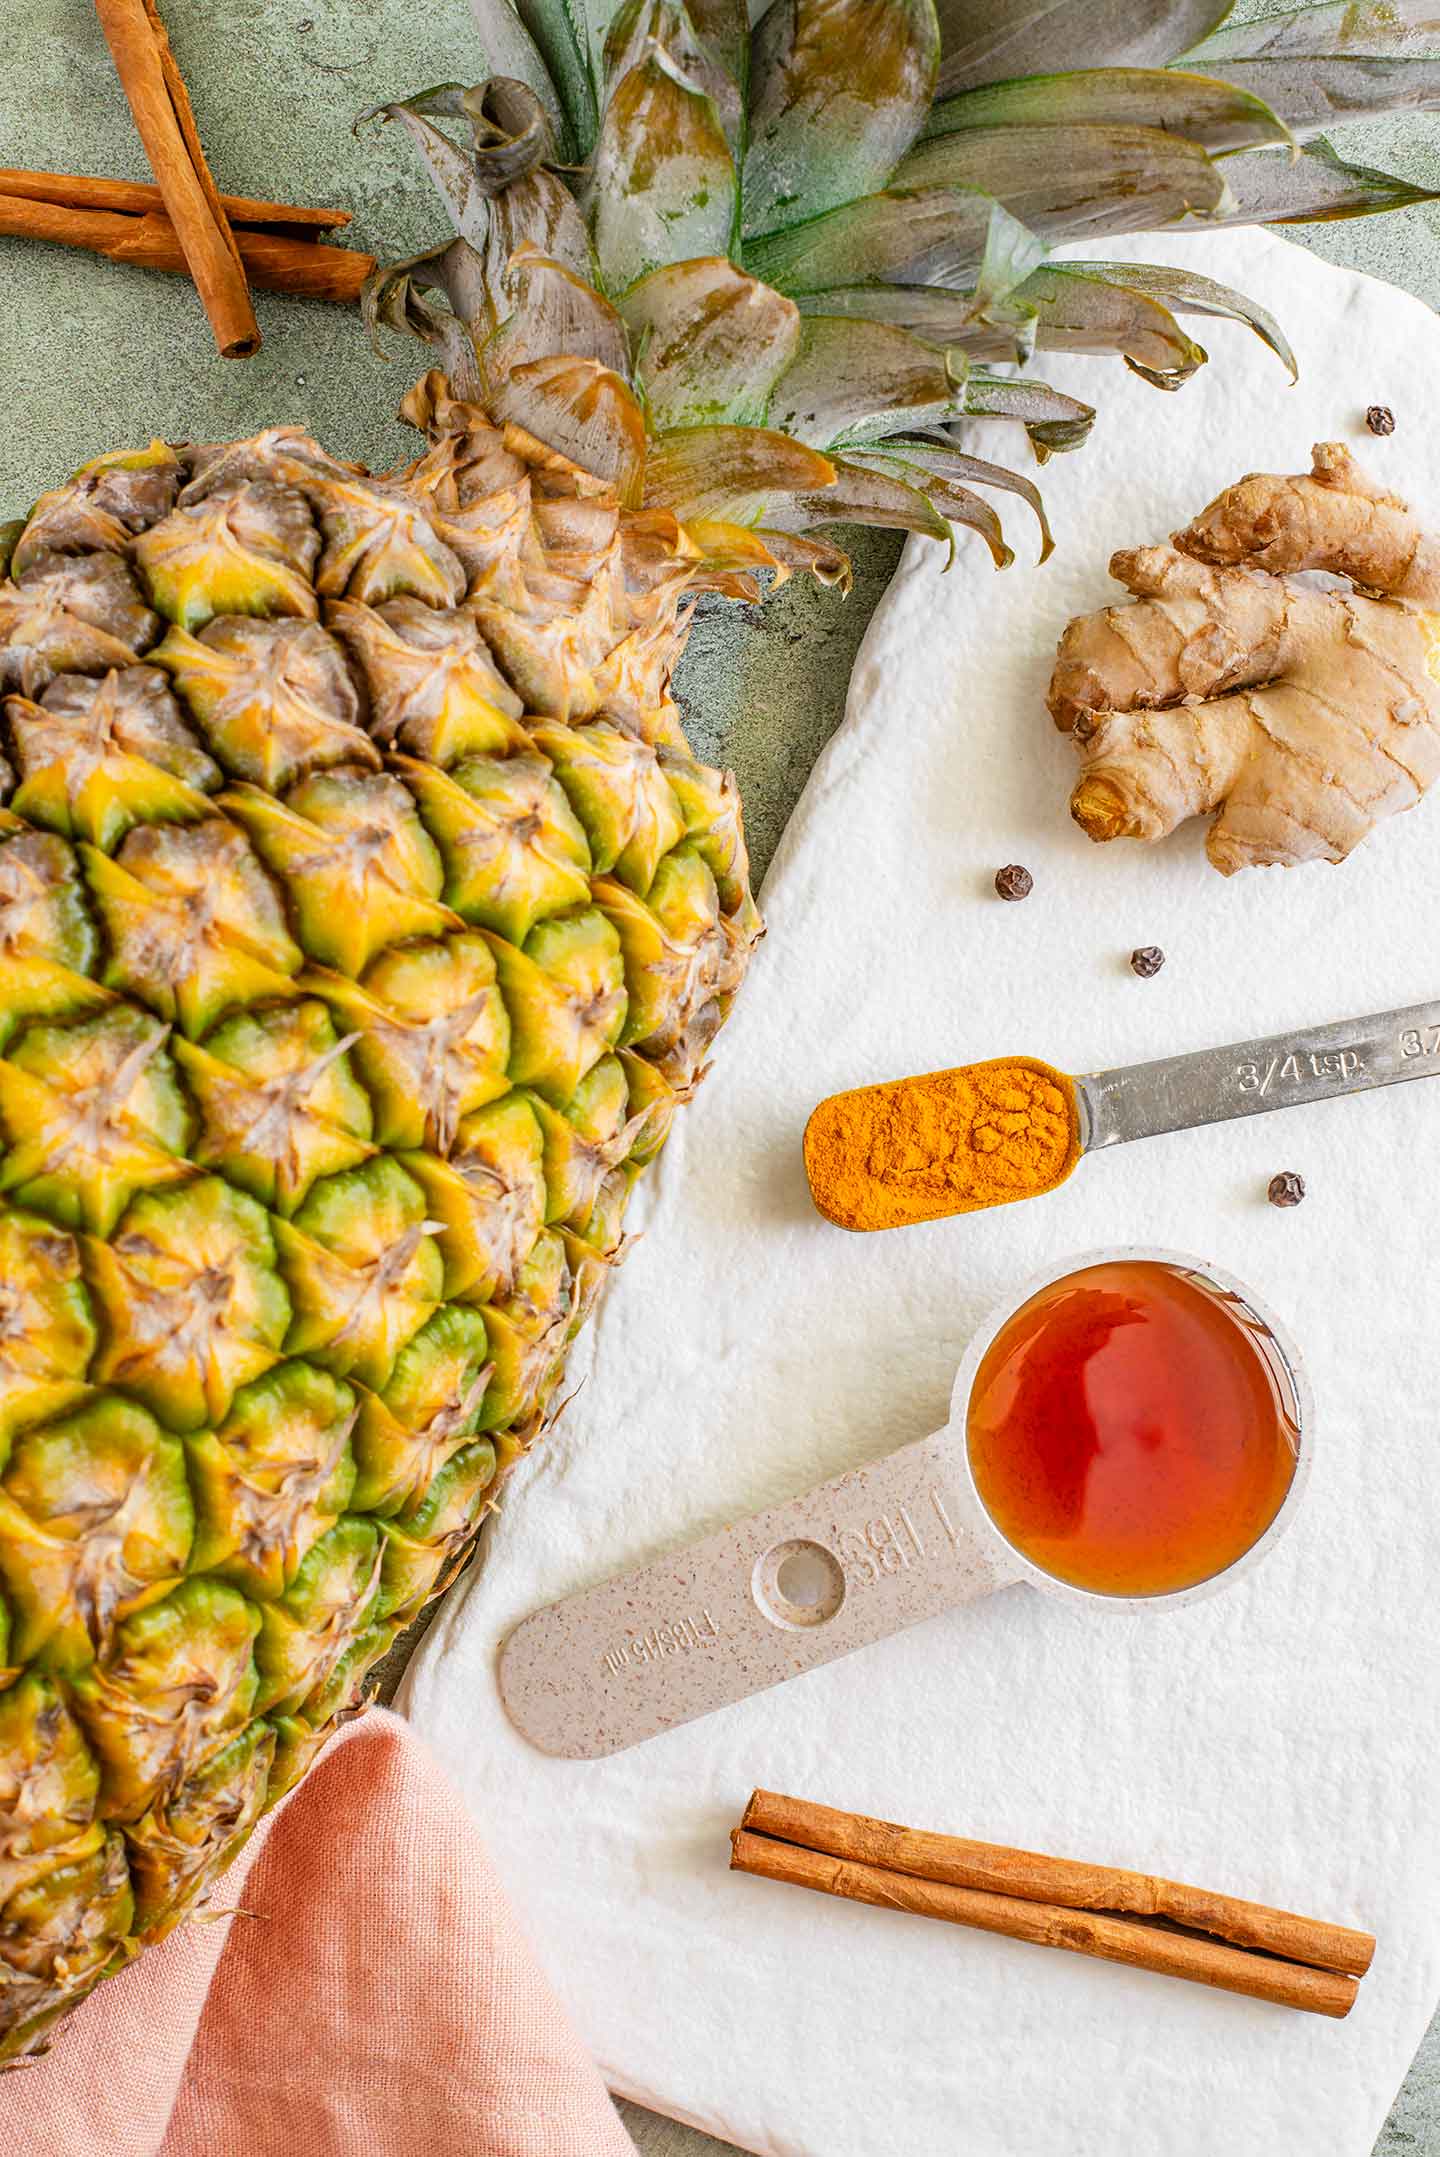 Top down view of a pineapple resting next to a tray of spices.